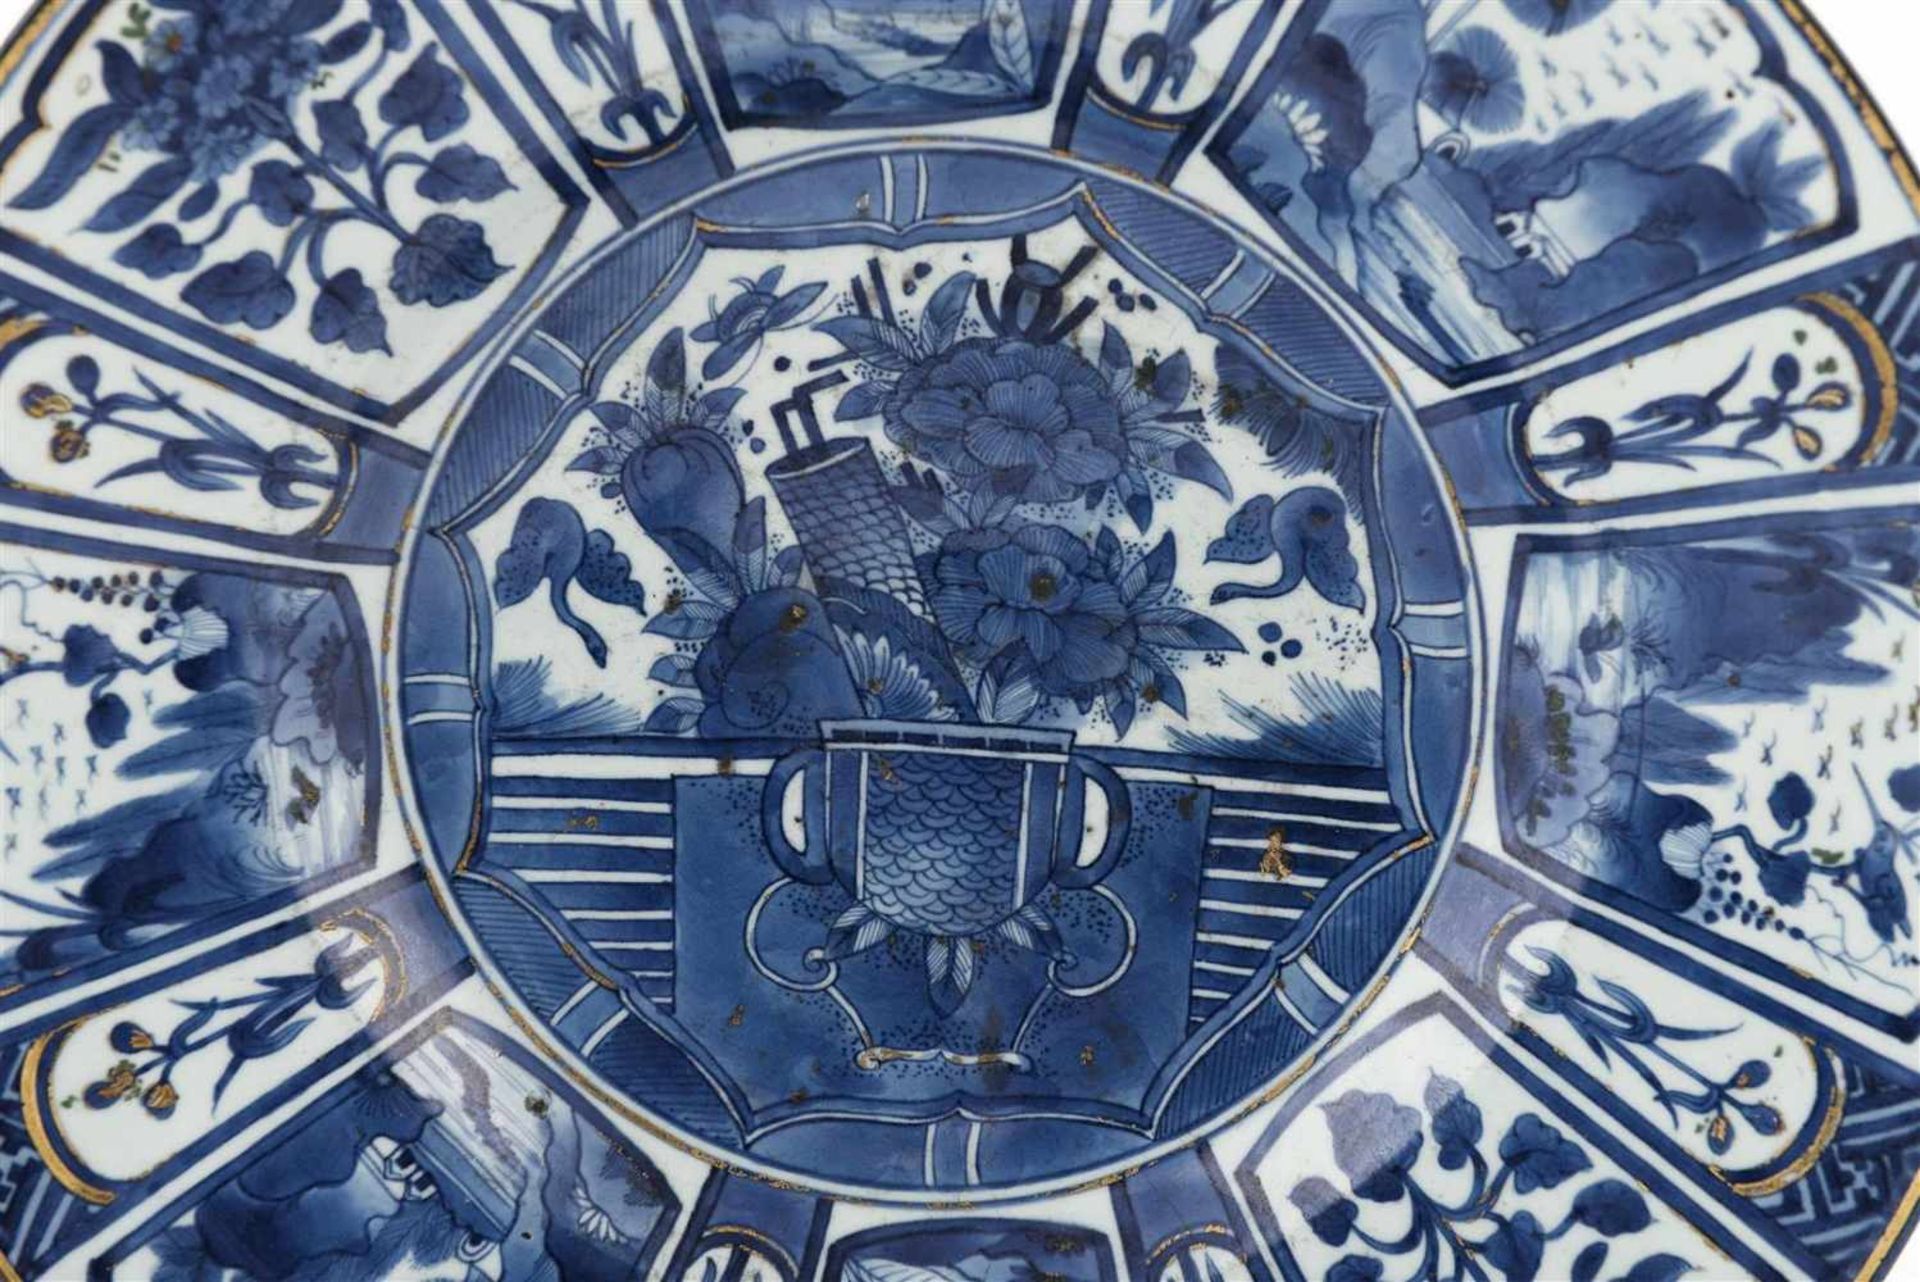 A large blue and white porcelain deep charger, decorated with flower vases and landscapes. Unmarked. - Image 2 of 3